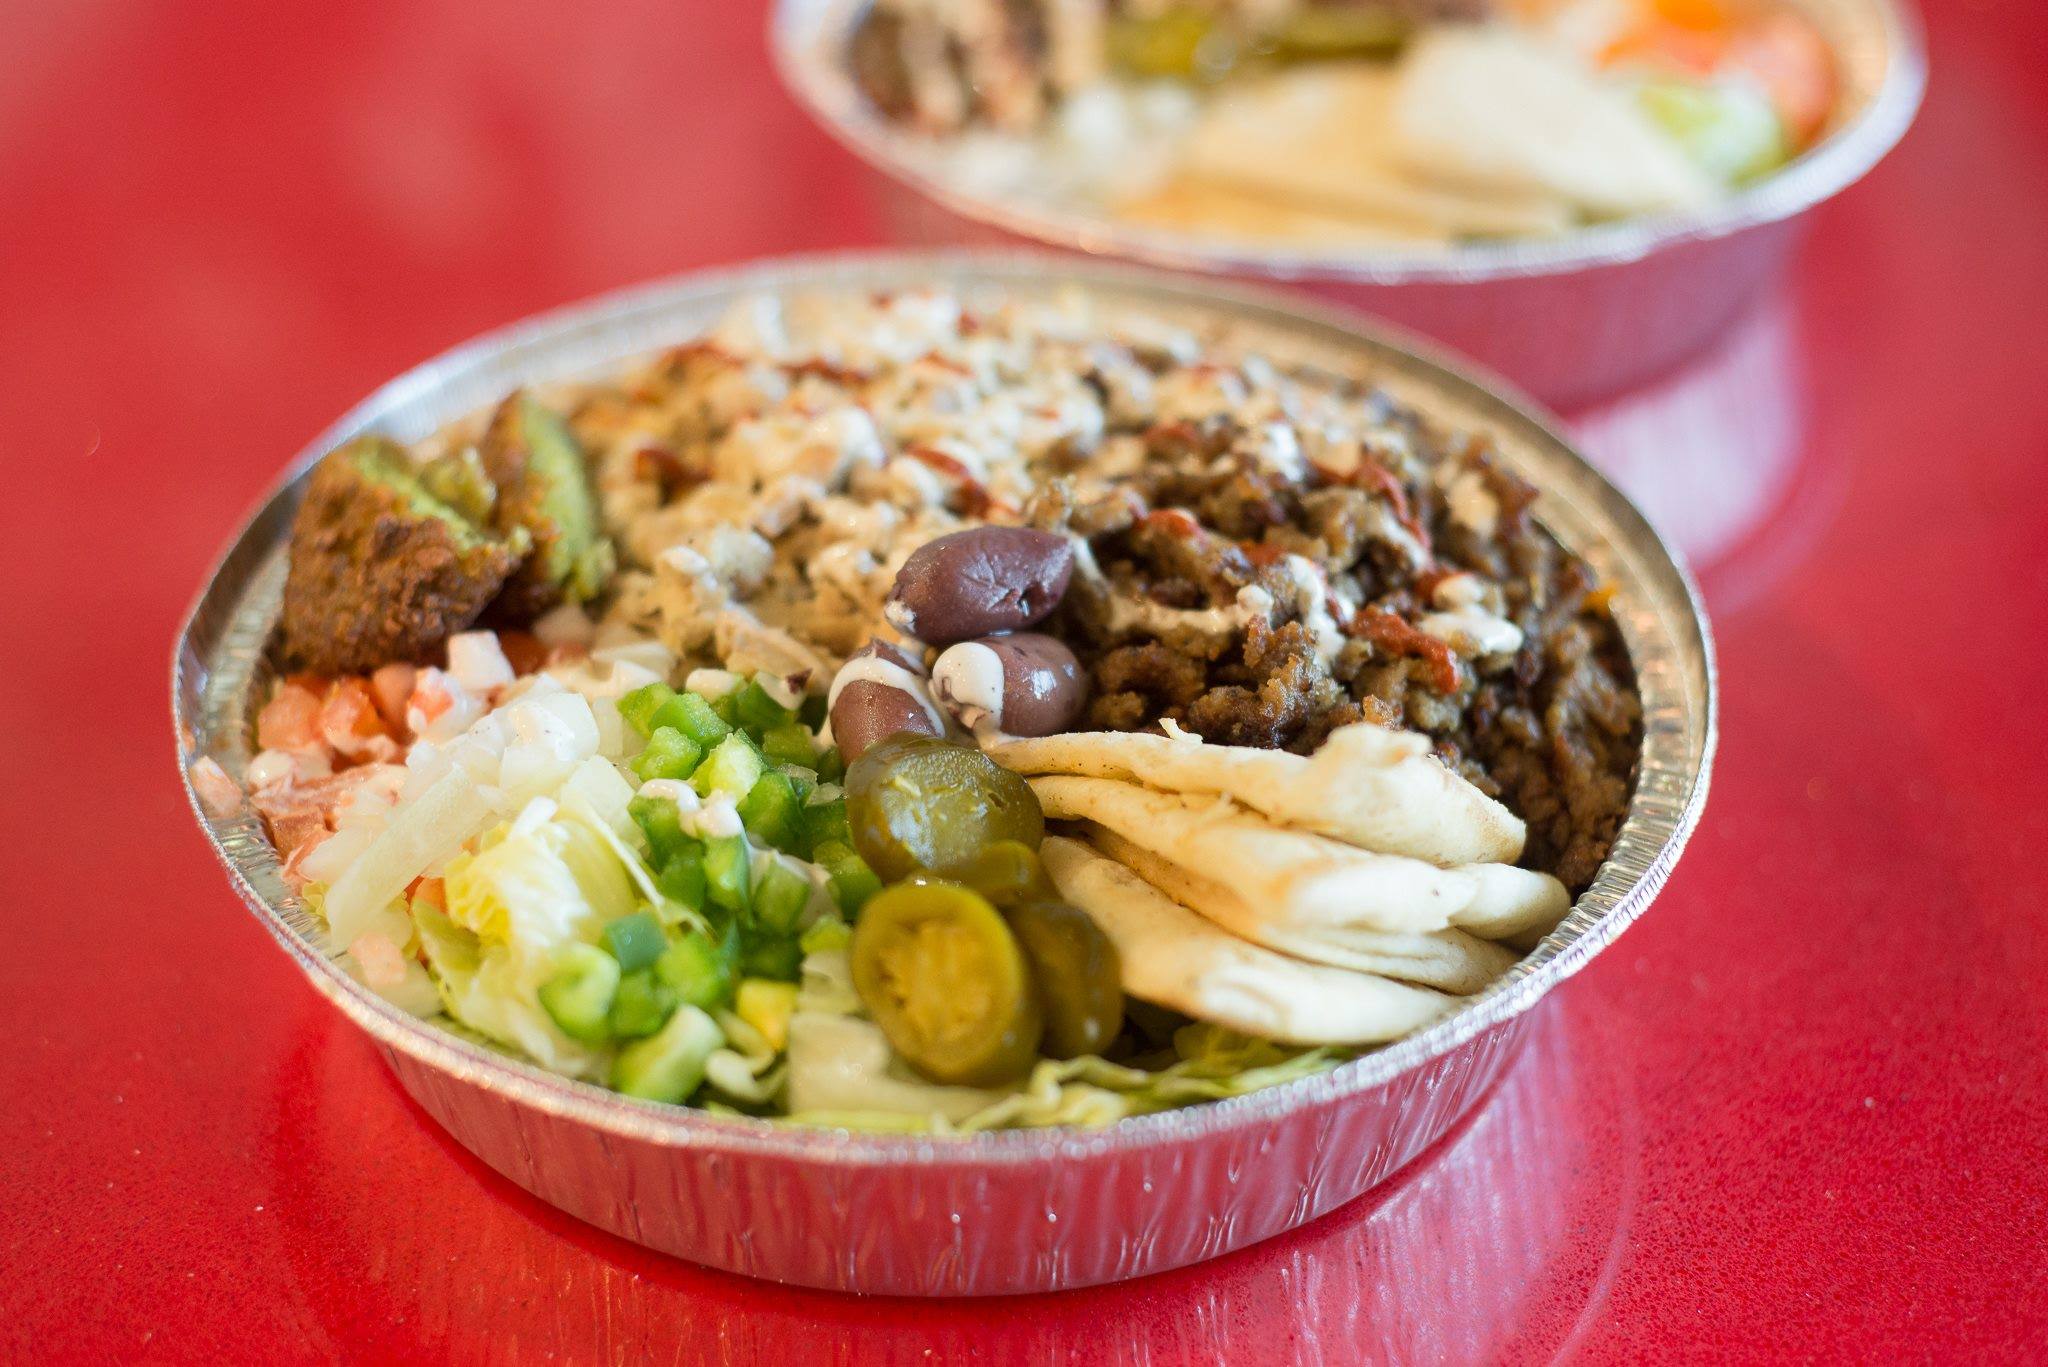 A platter from The Halal Guys